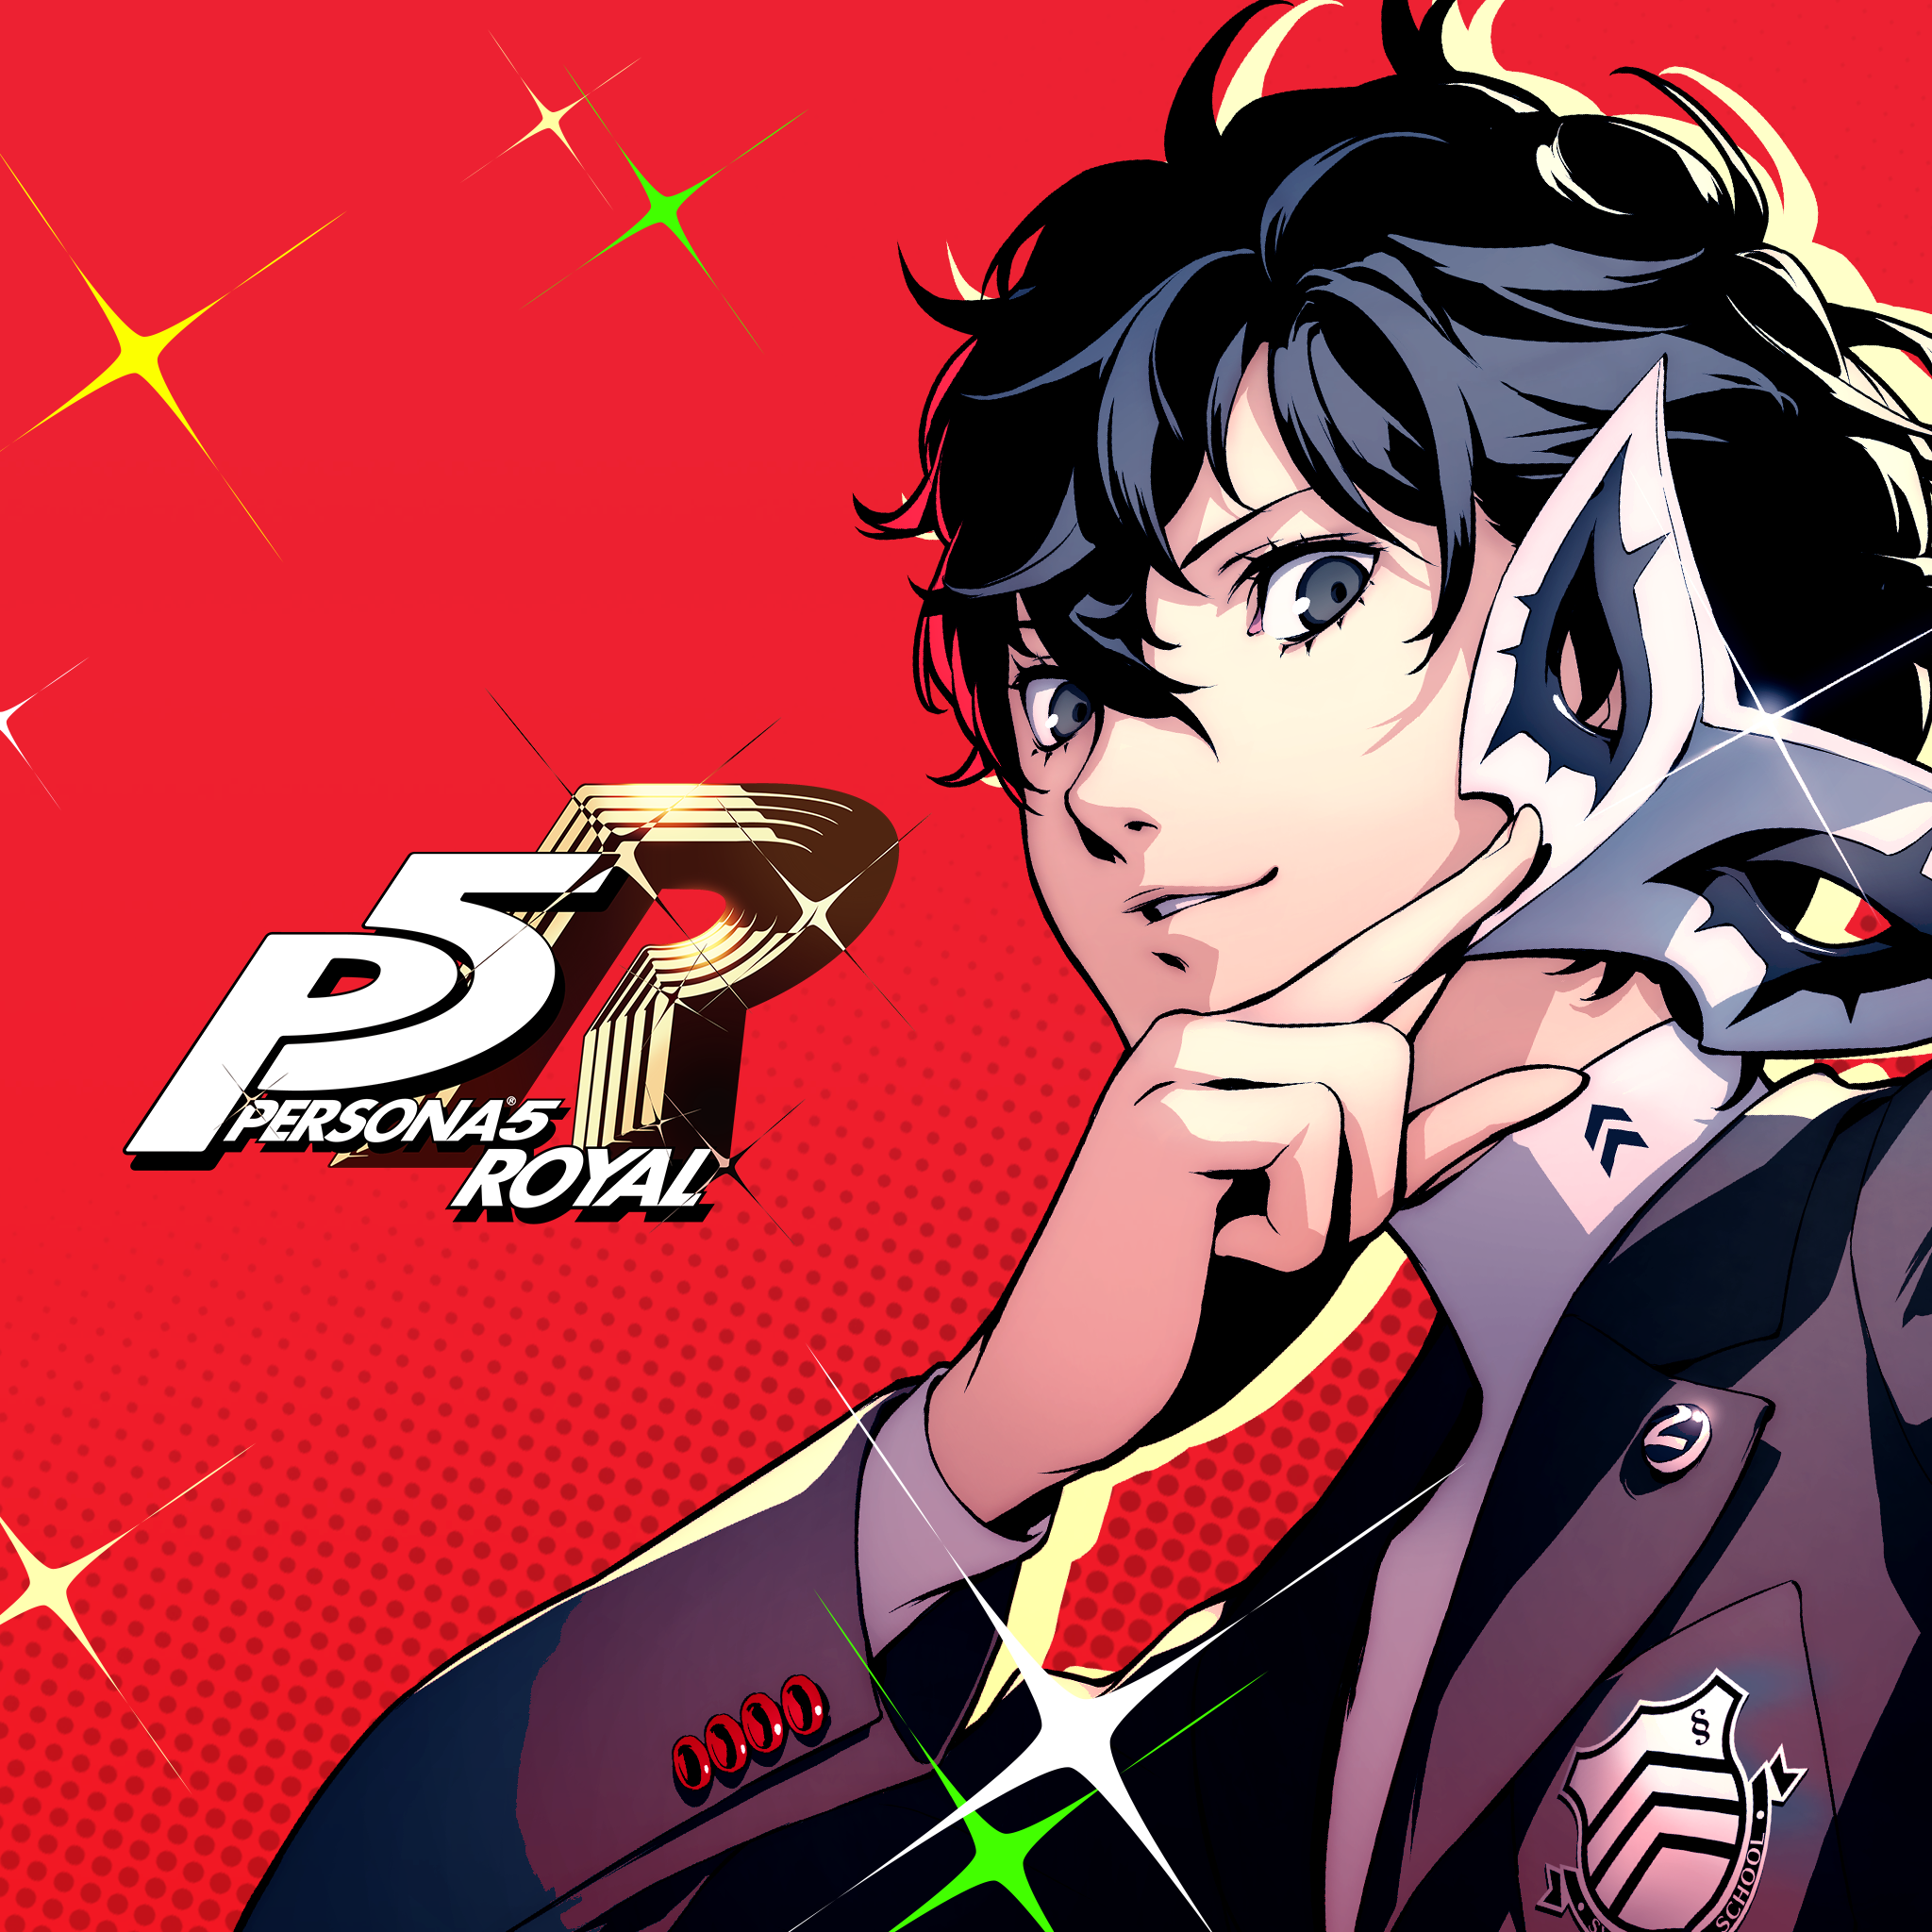 Persona®5 Royal PS4 Price & Sale History Get 60 Discount PS Store